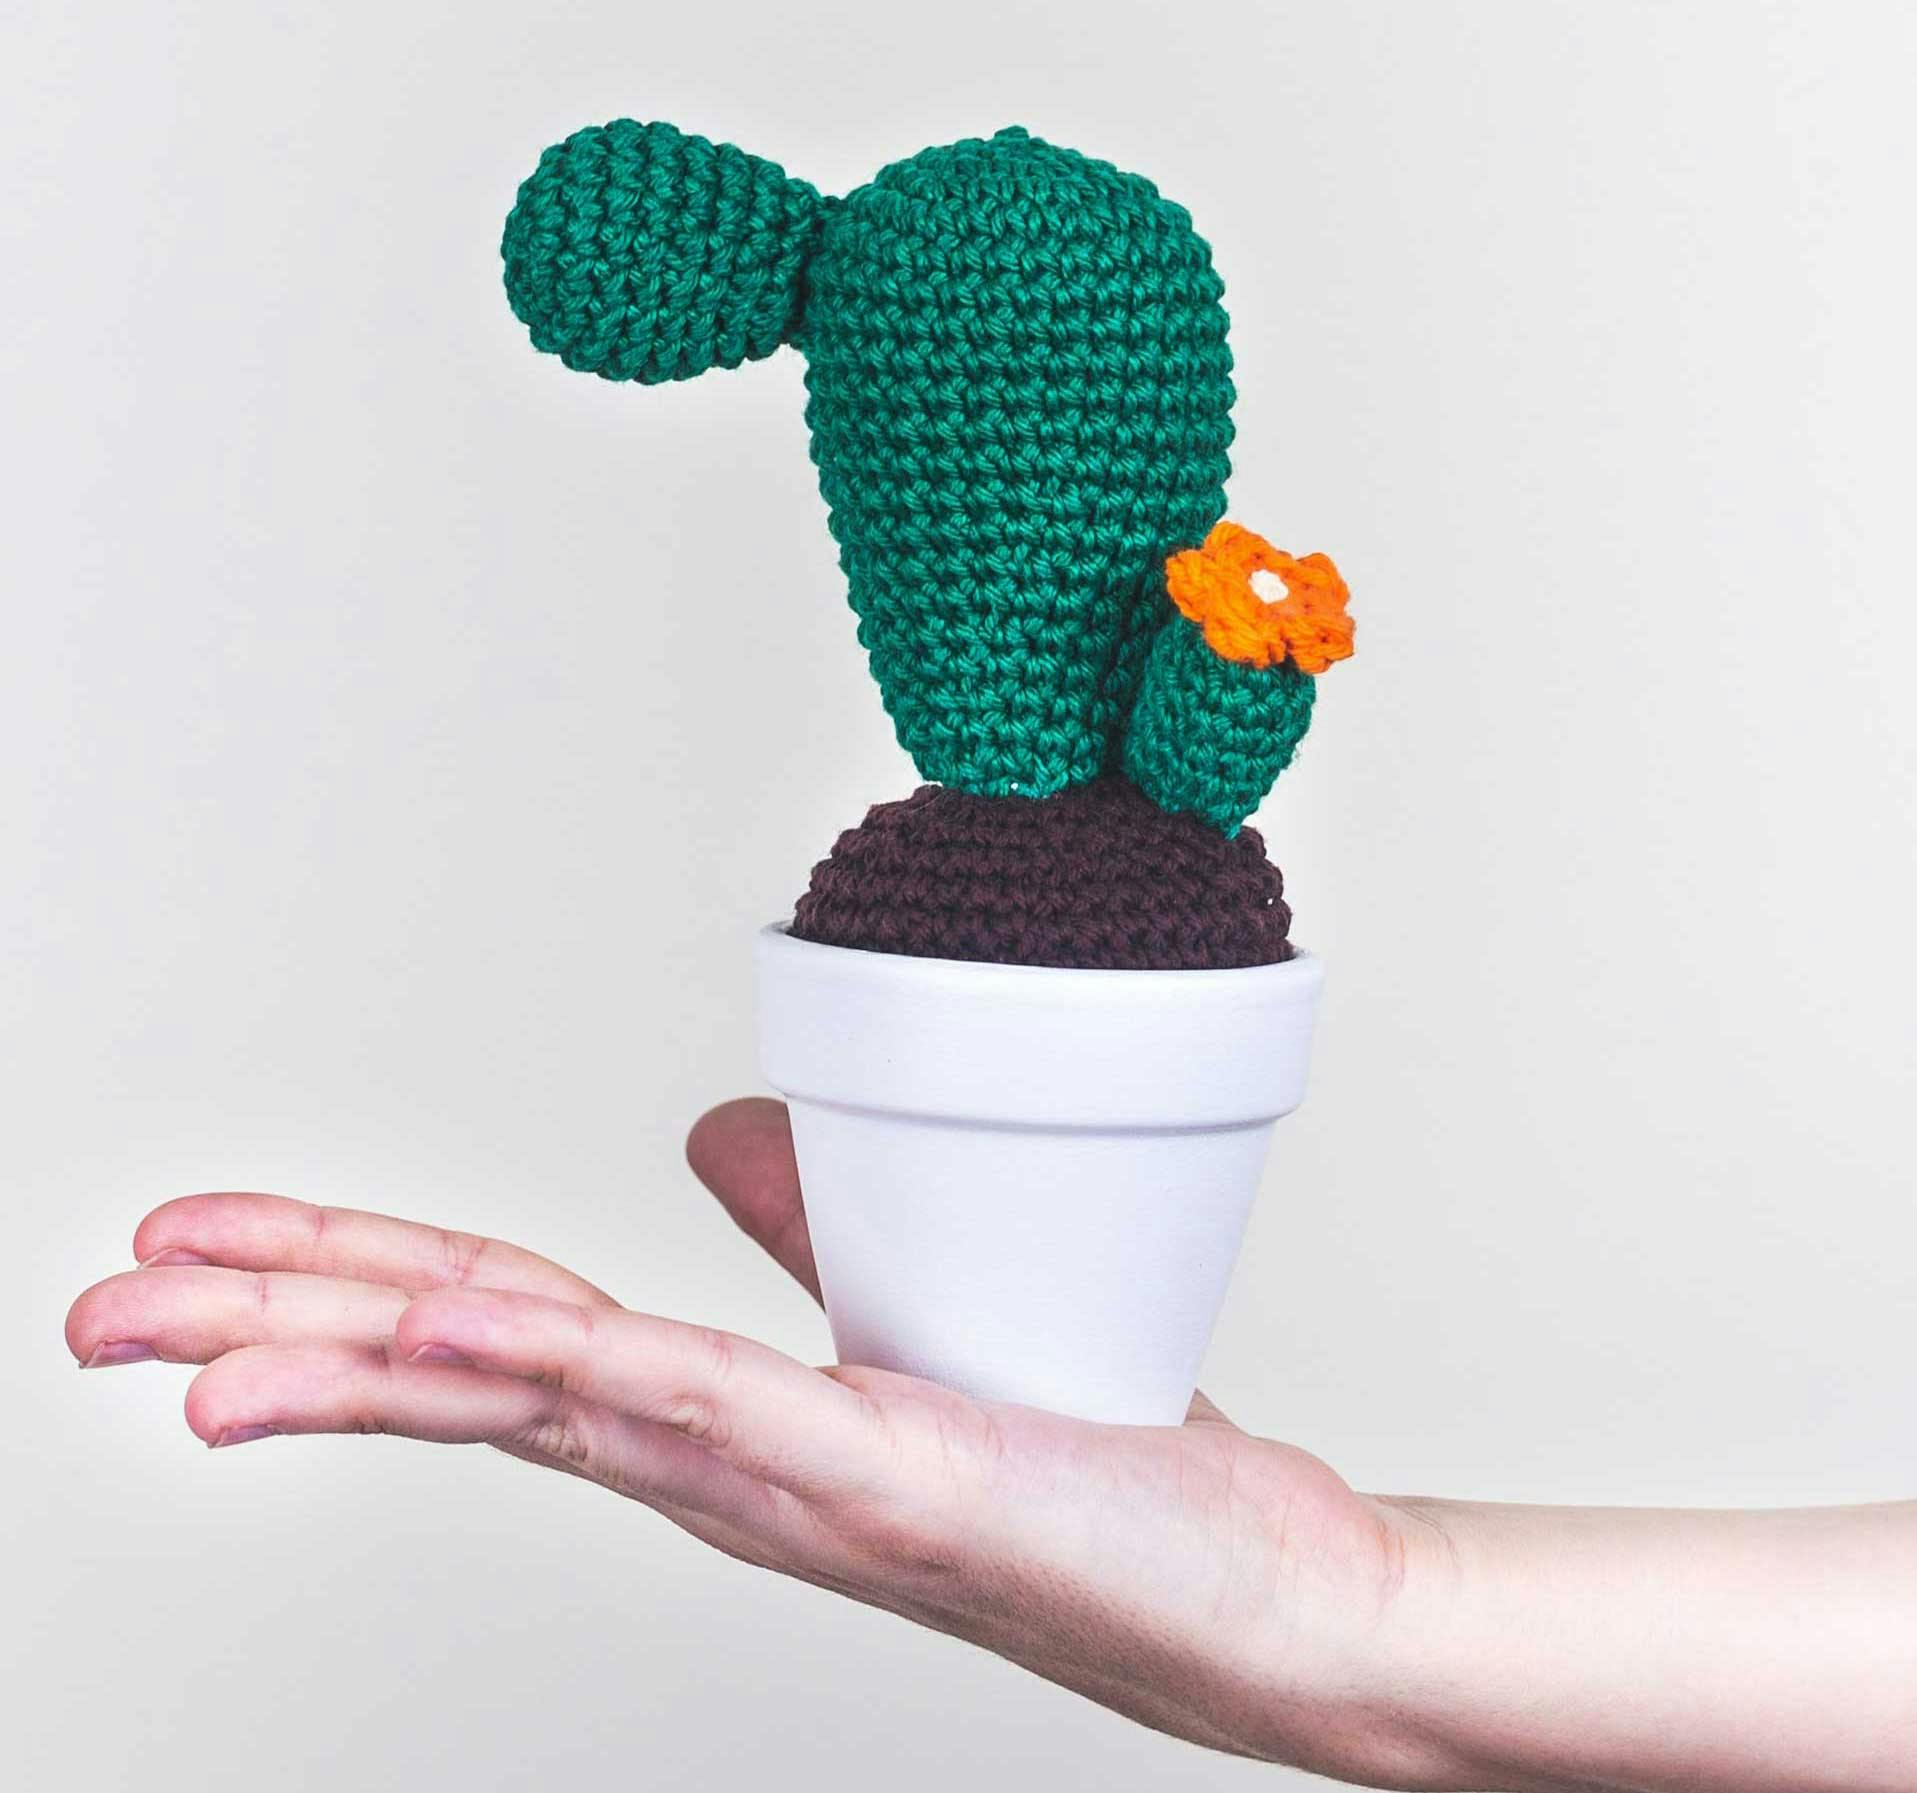  green crocheted cactus in a pot